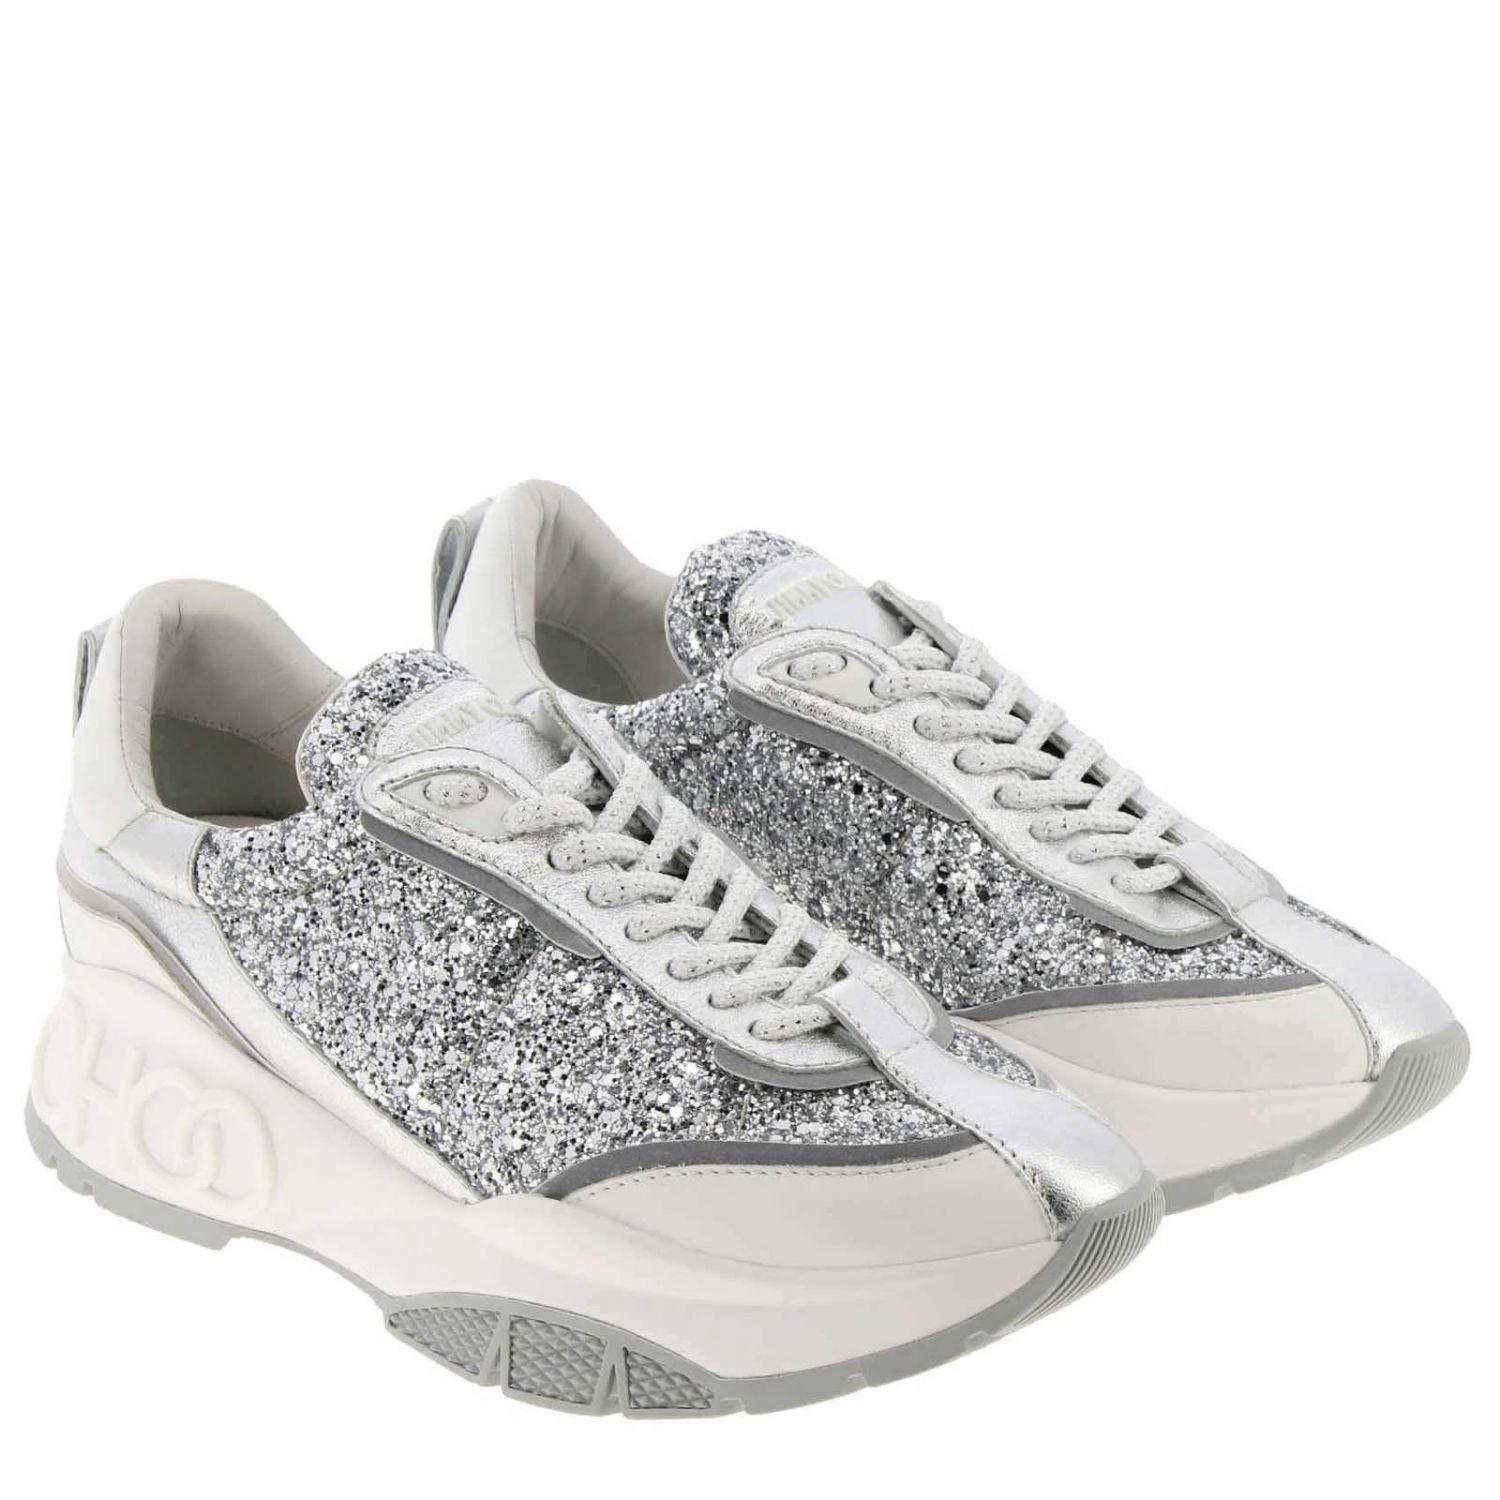 Jimmy Choo Outlet: Raine sneakers in genuine laminated and smooth ...